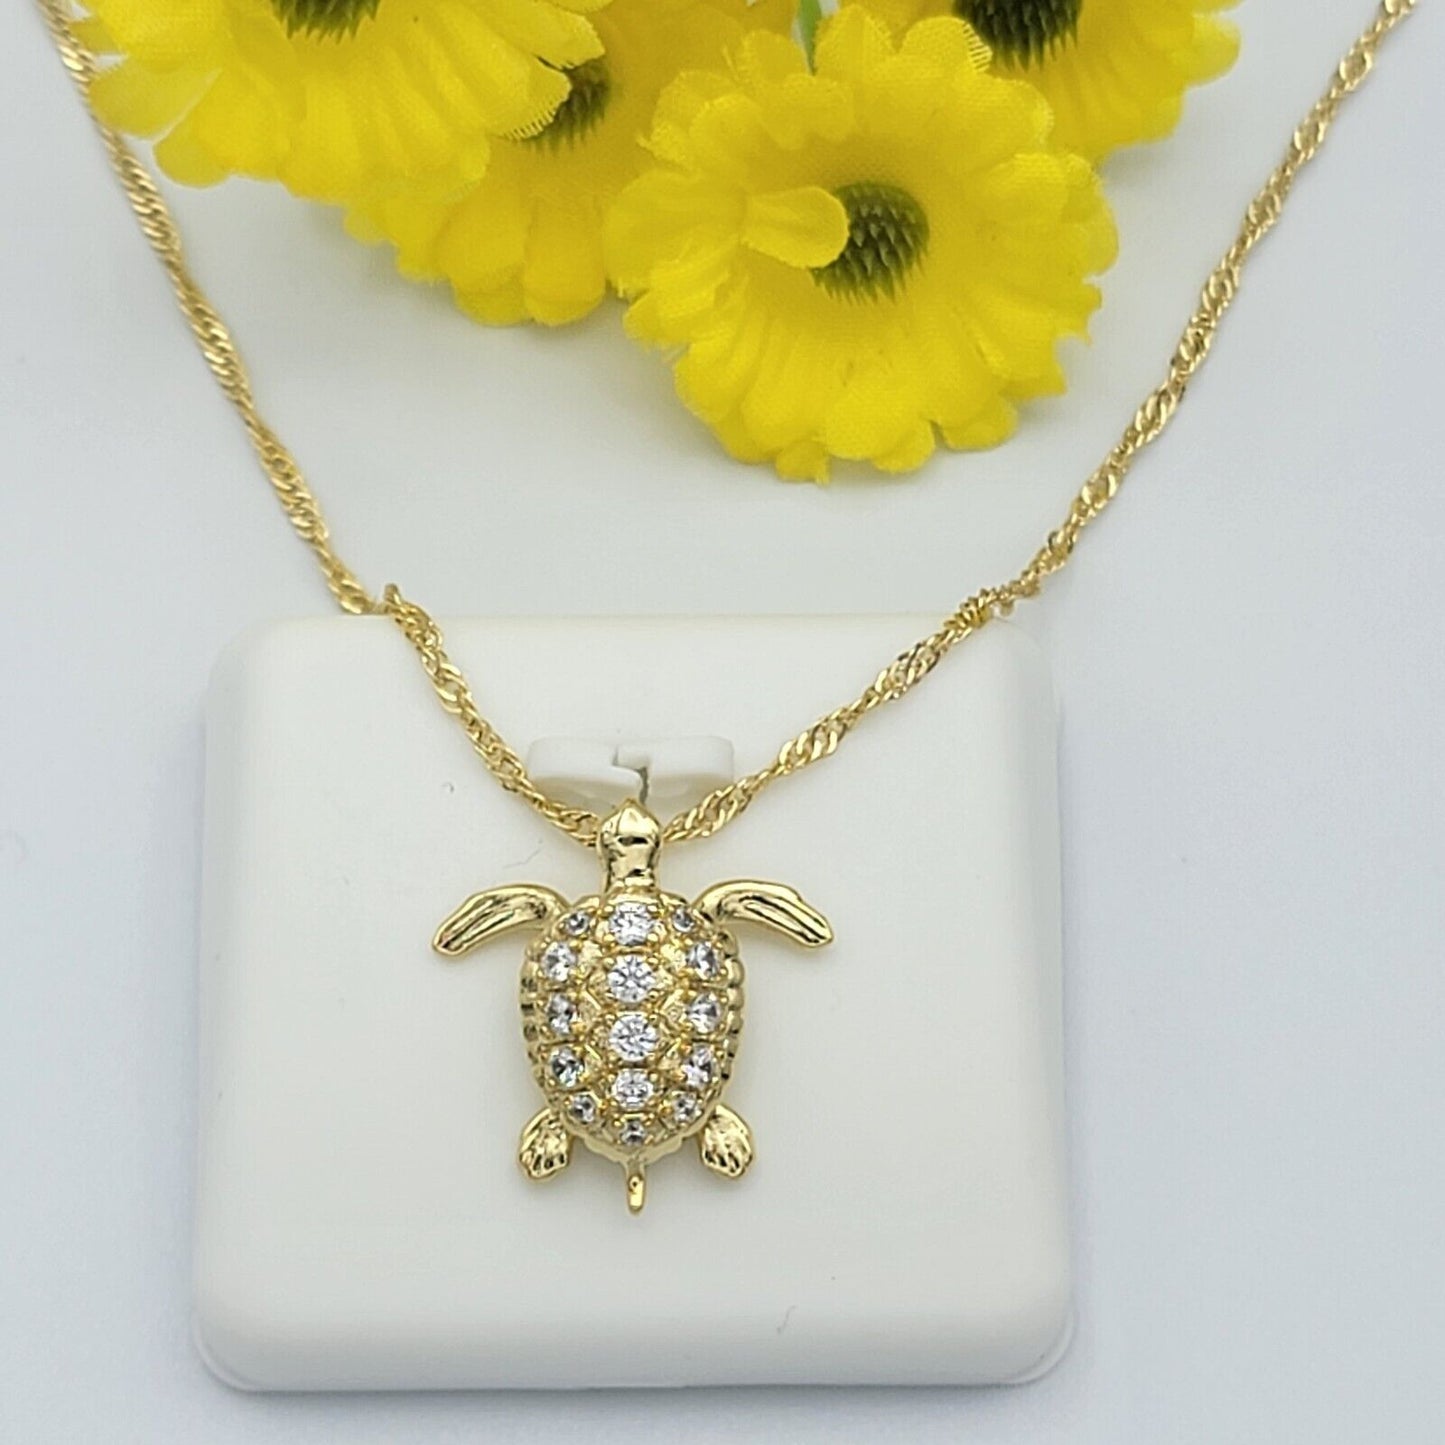 Necklaces - 14K Gold Plated. Cute Turtle Pendant & Chain.